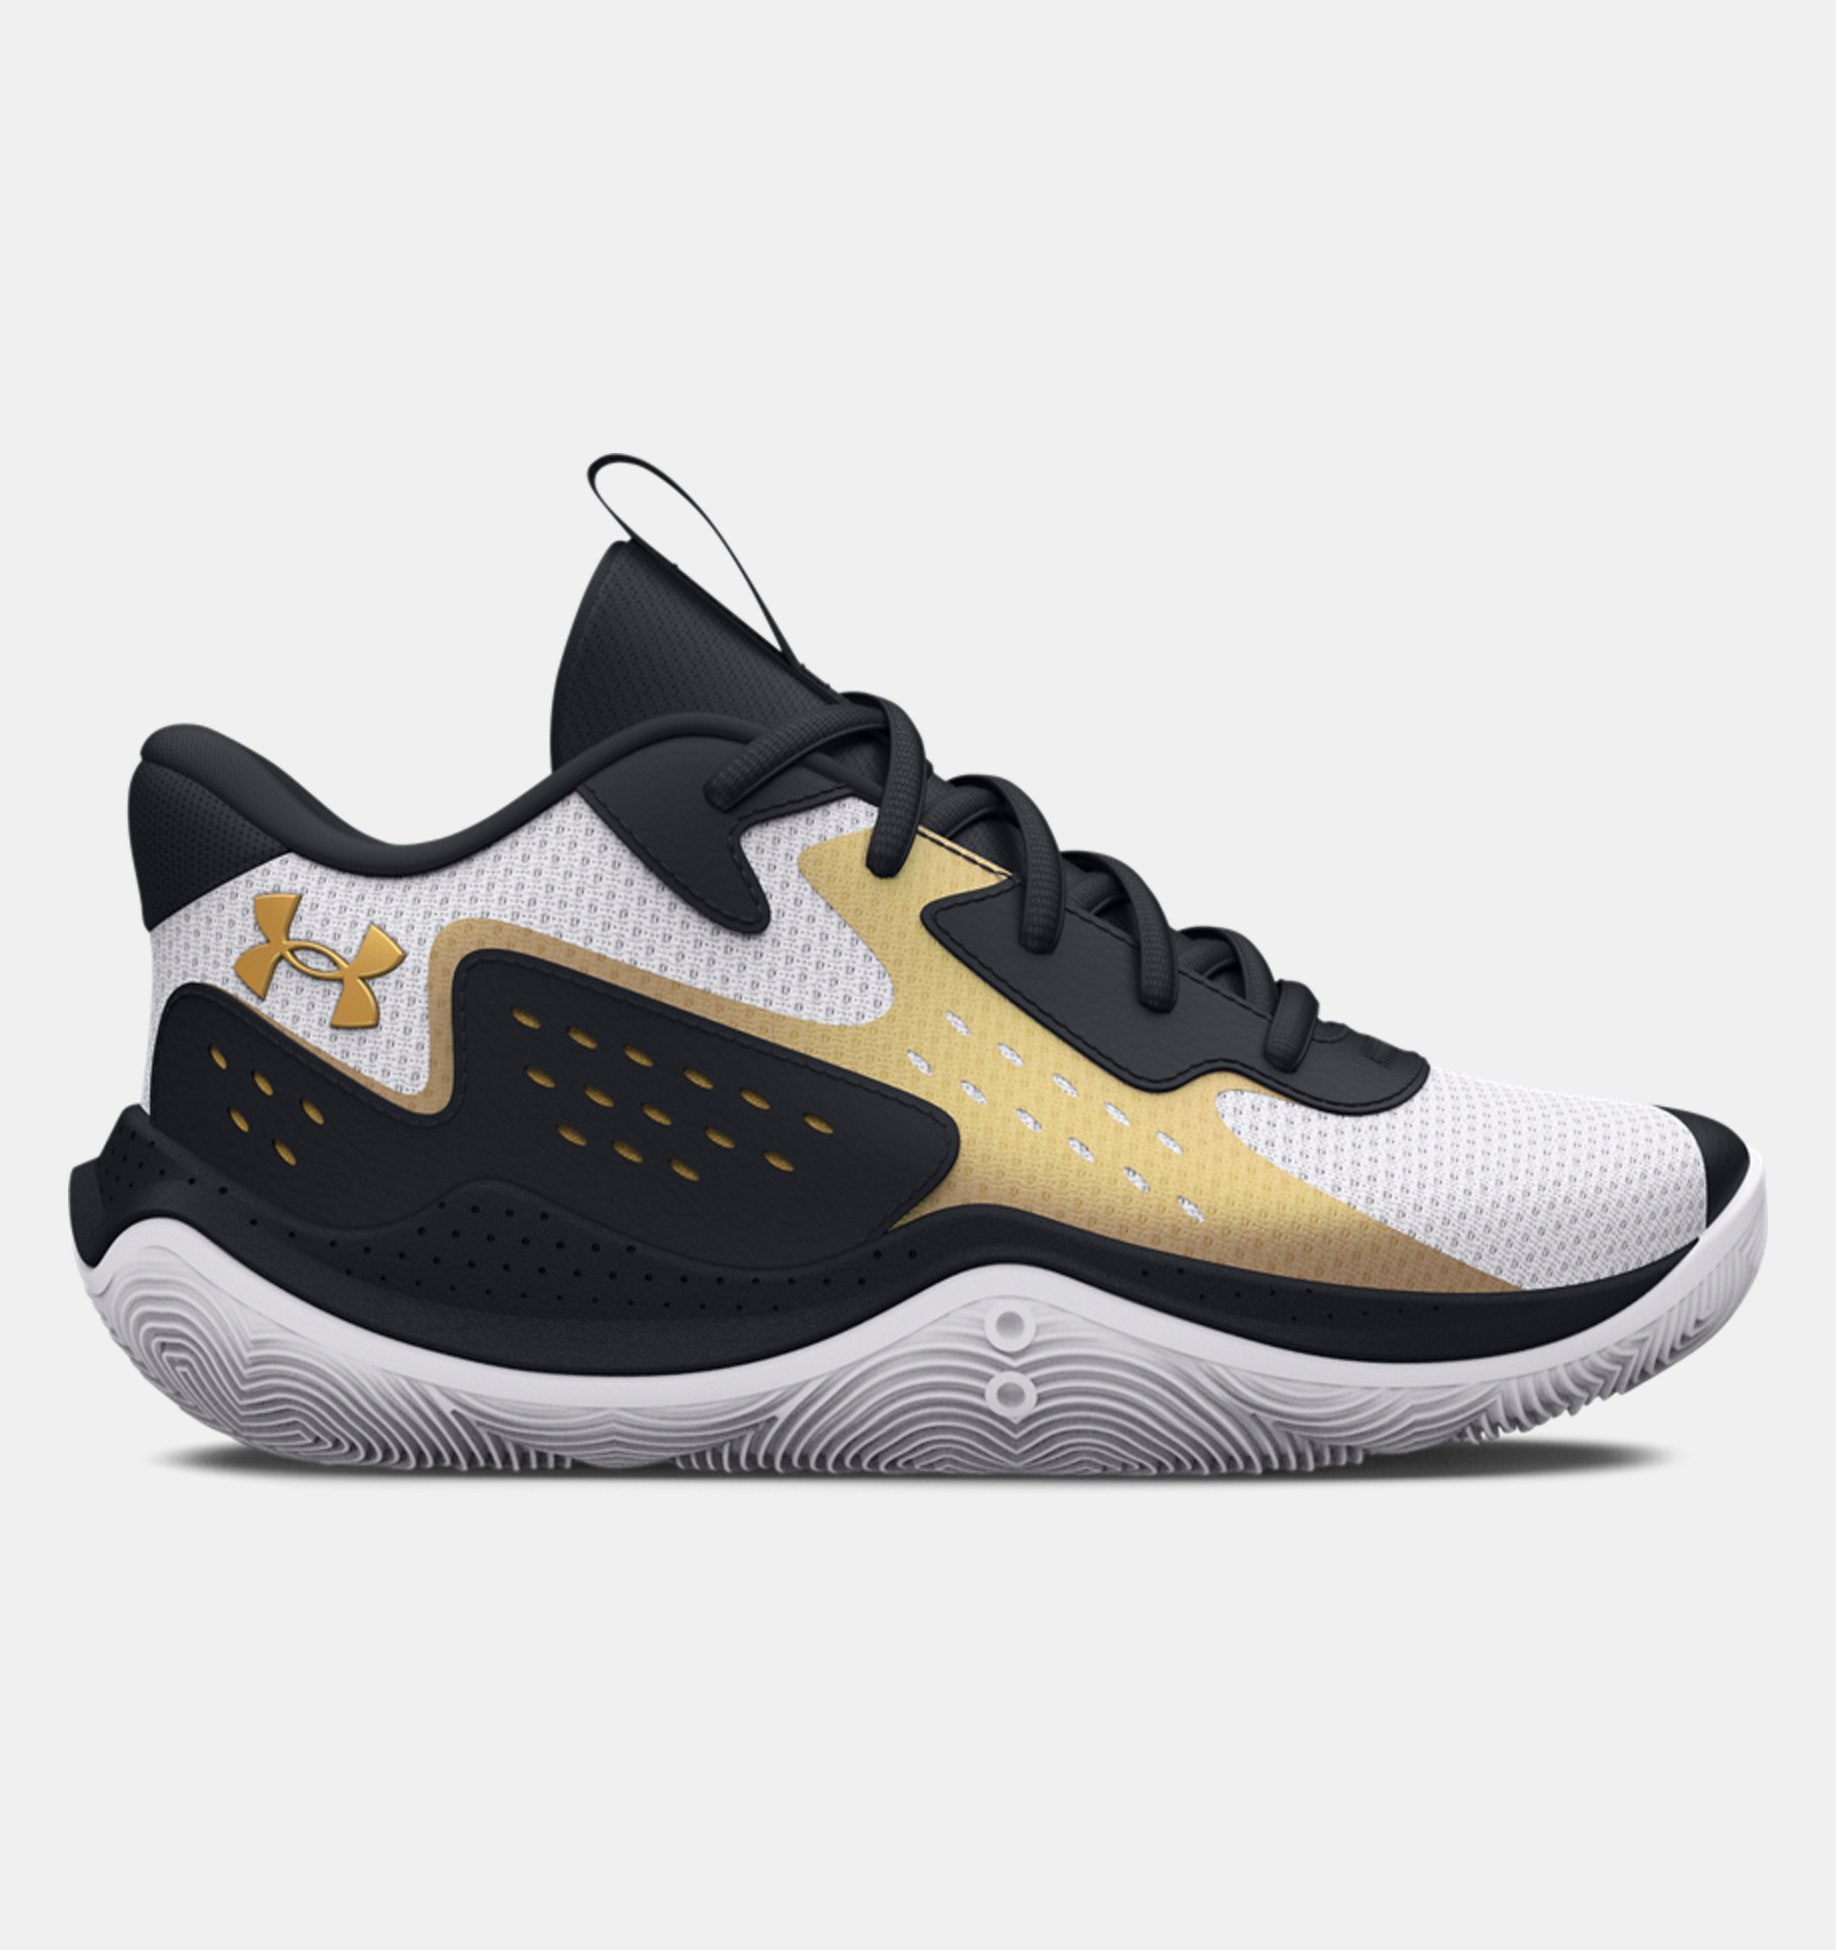 Under Armour Kids' Jet '23 Basketball Shoes (PS) Footwear Under Armour White/Black/Metallic Gold-100 13 